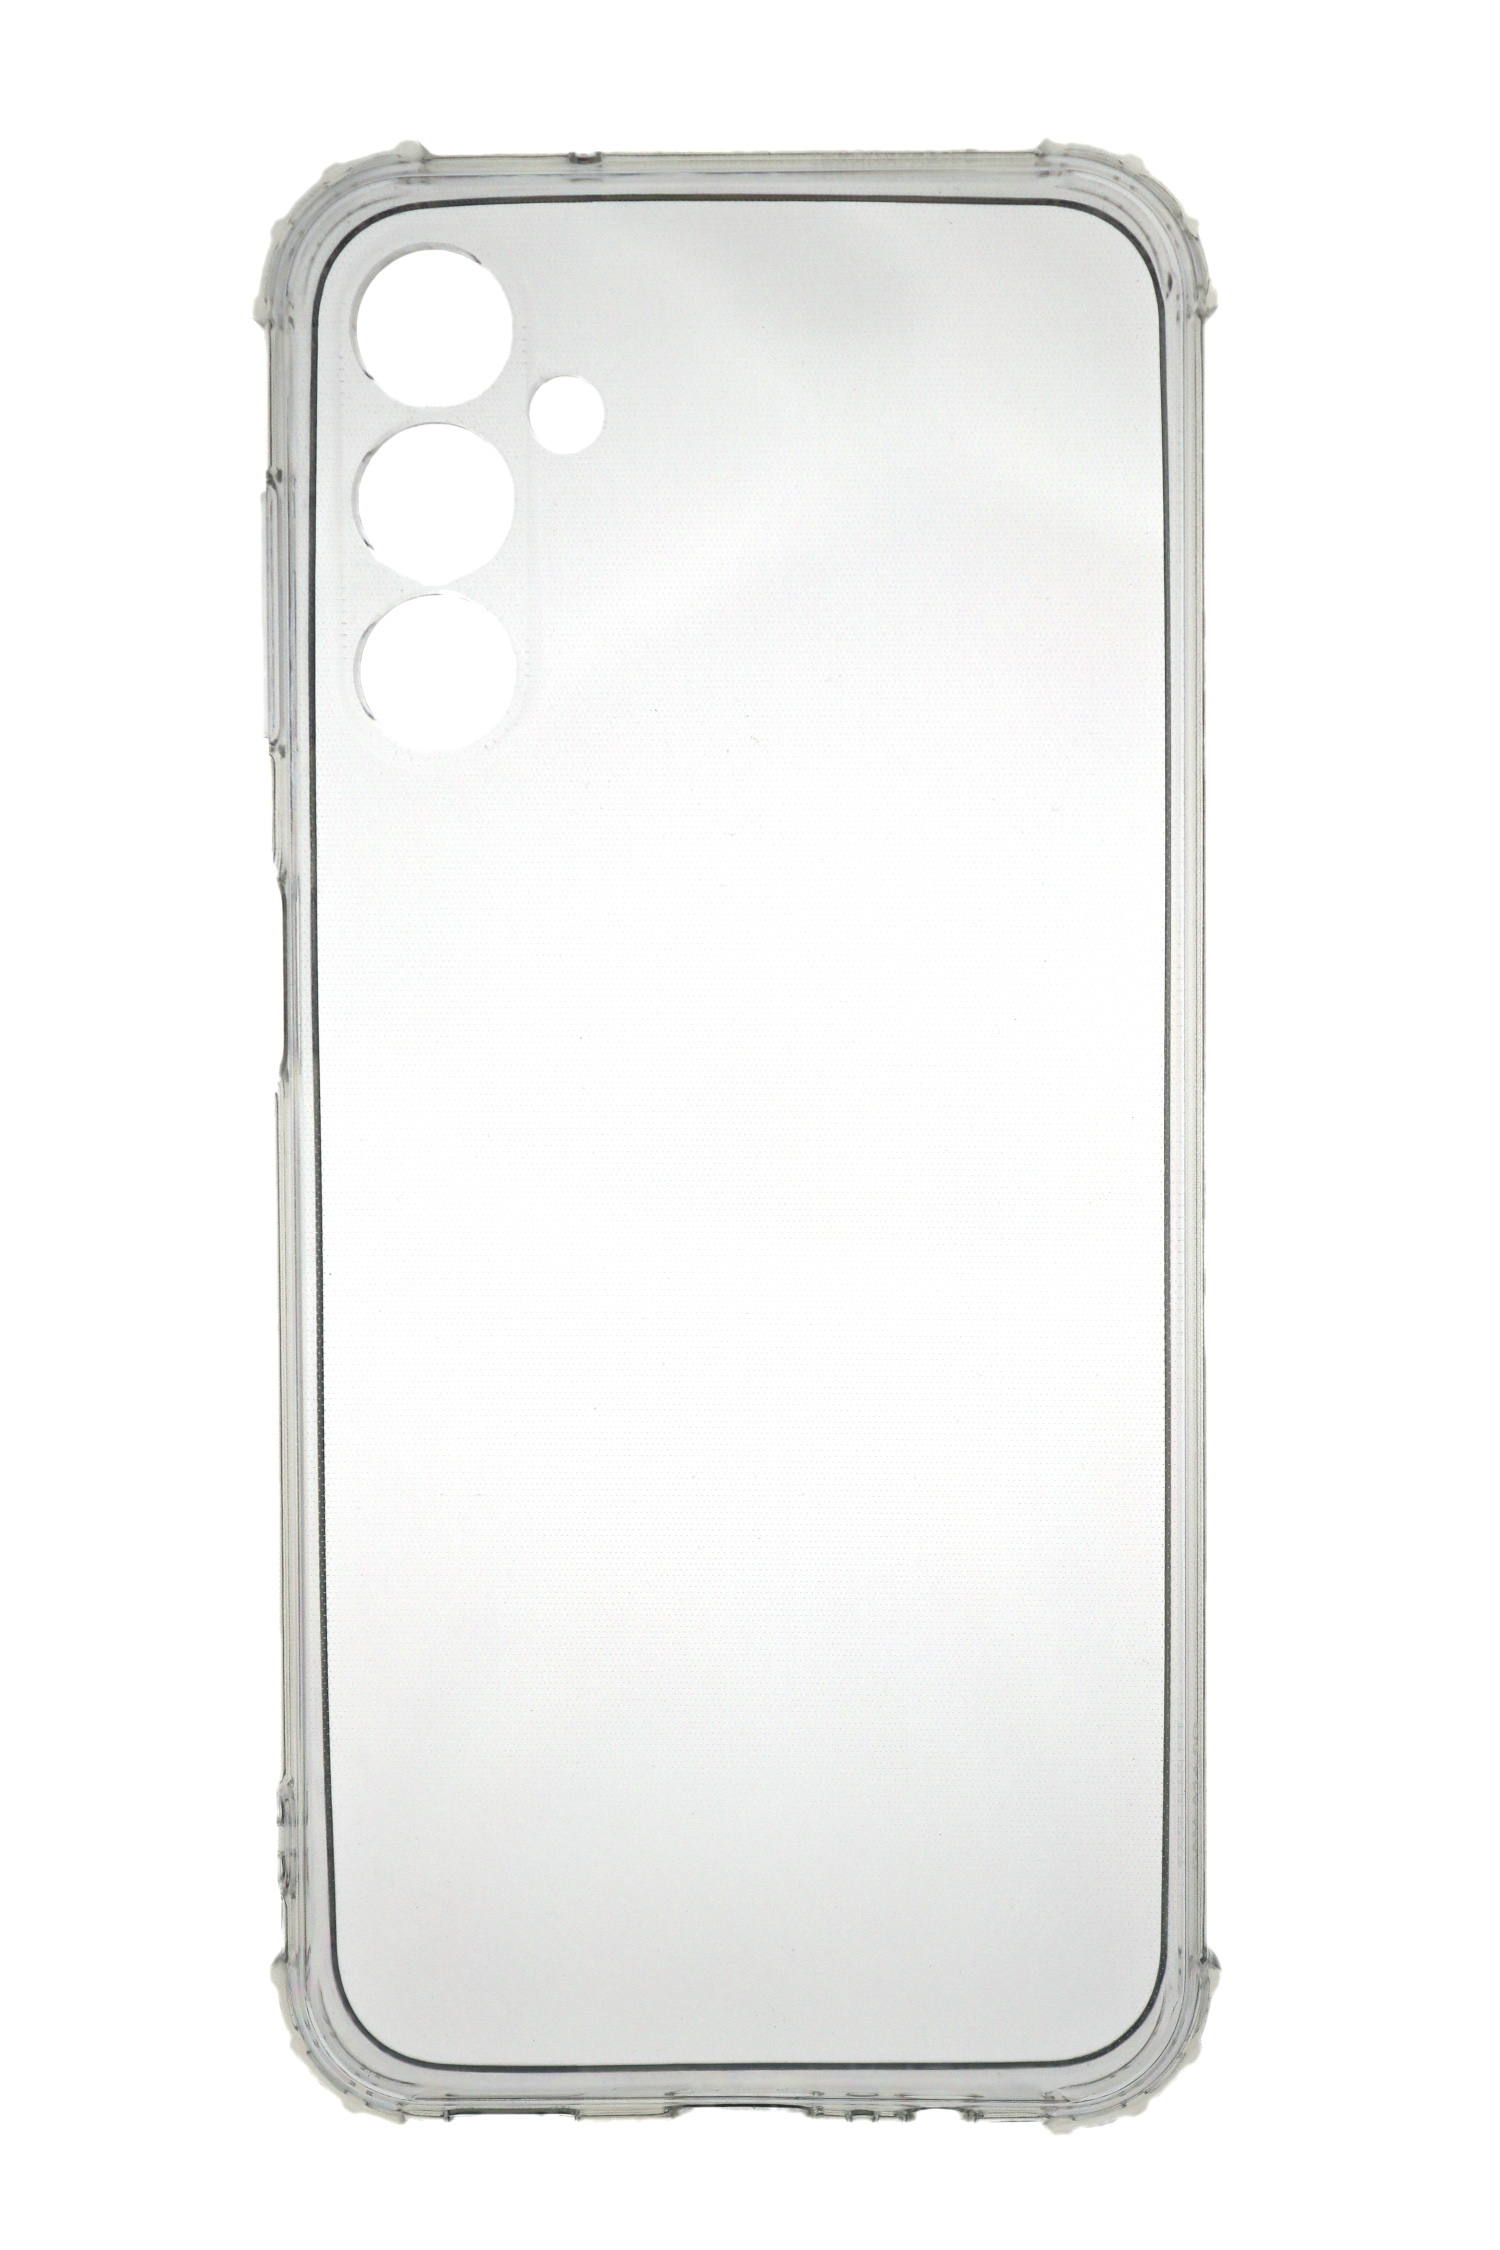 Galaxy Shock Samsung, A14, 1.5 Galaxy 5G, JAMCOVER A14 Case, mm Transparent Anti Backcover,